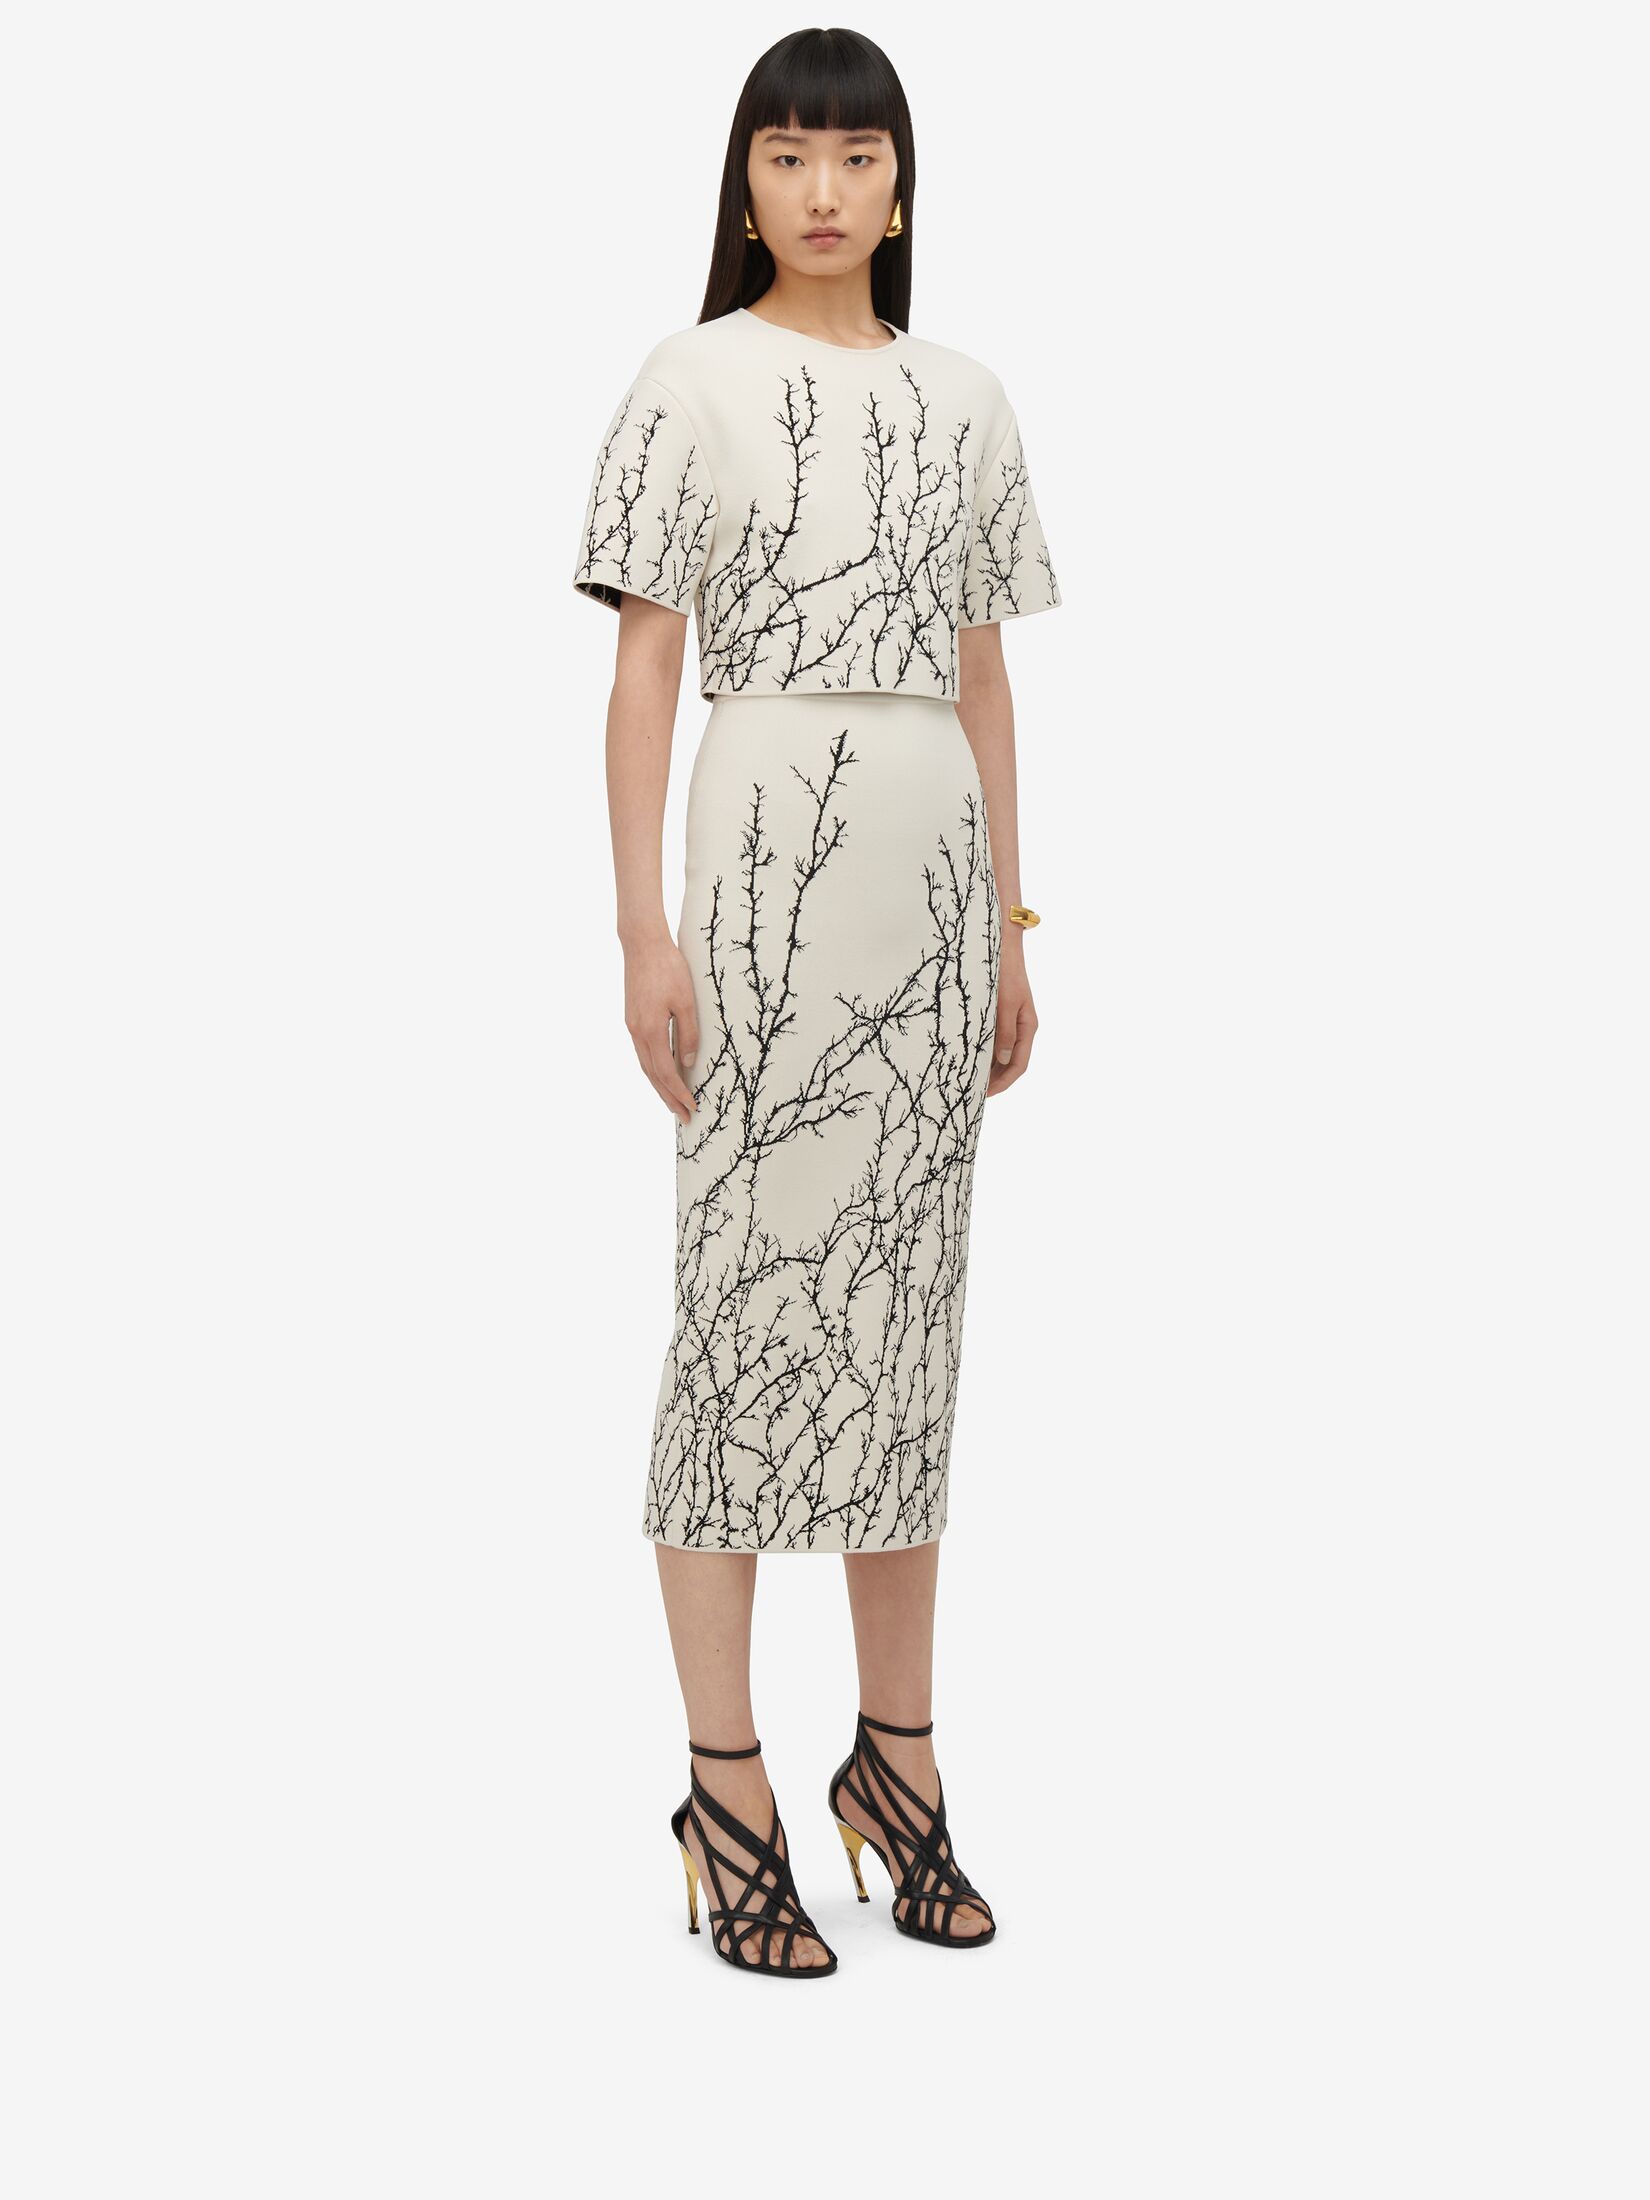 Thorn Branches Pencil Skirt